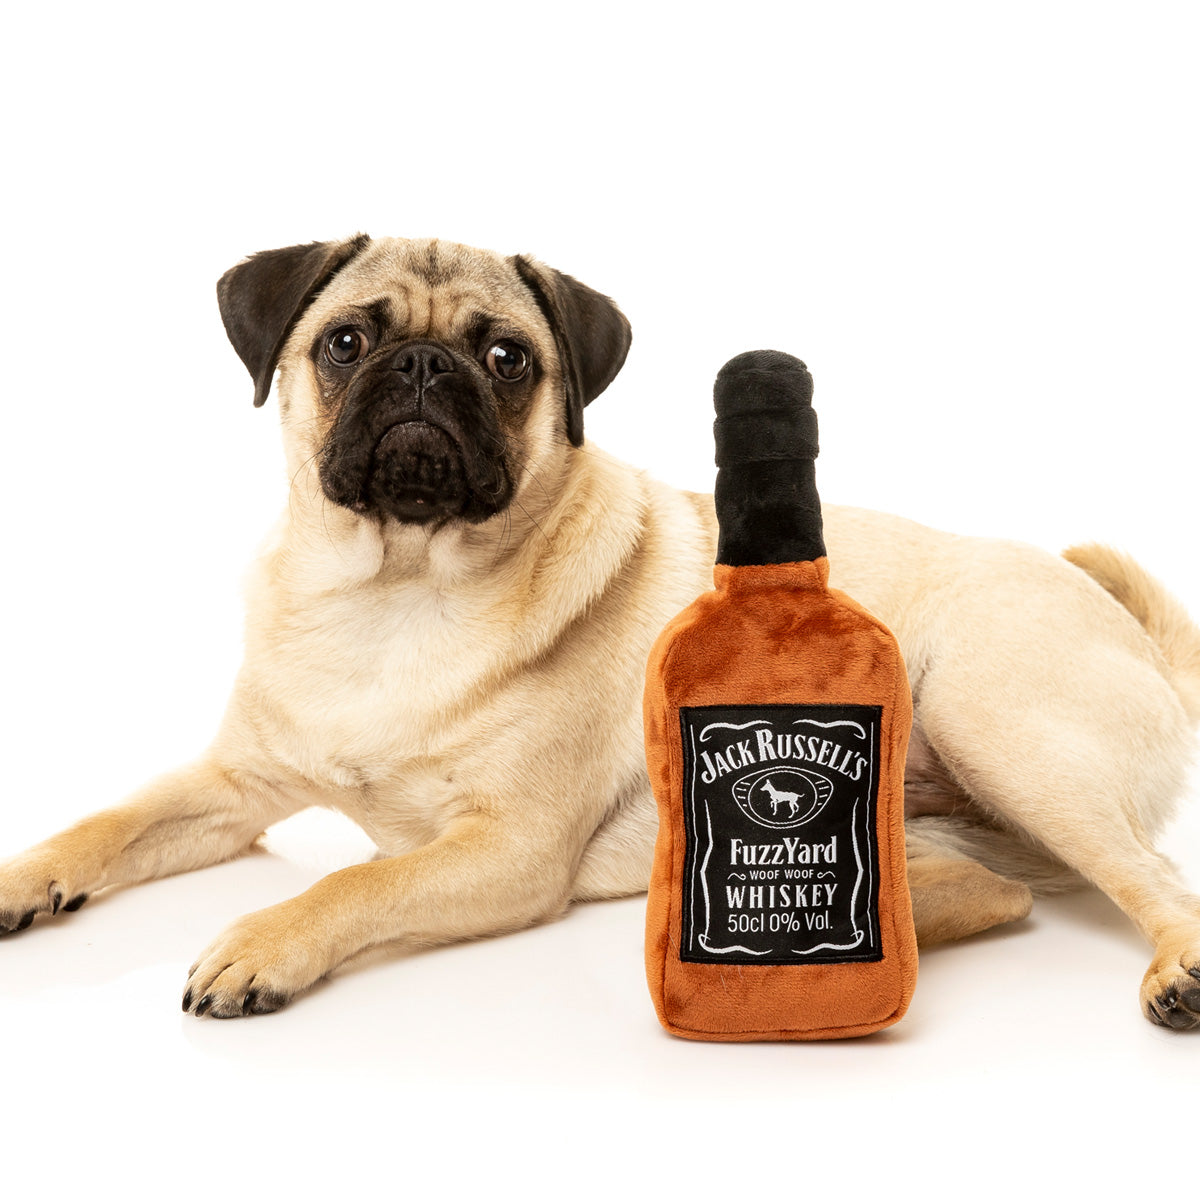 jack-russells-whiskey-dog-toy